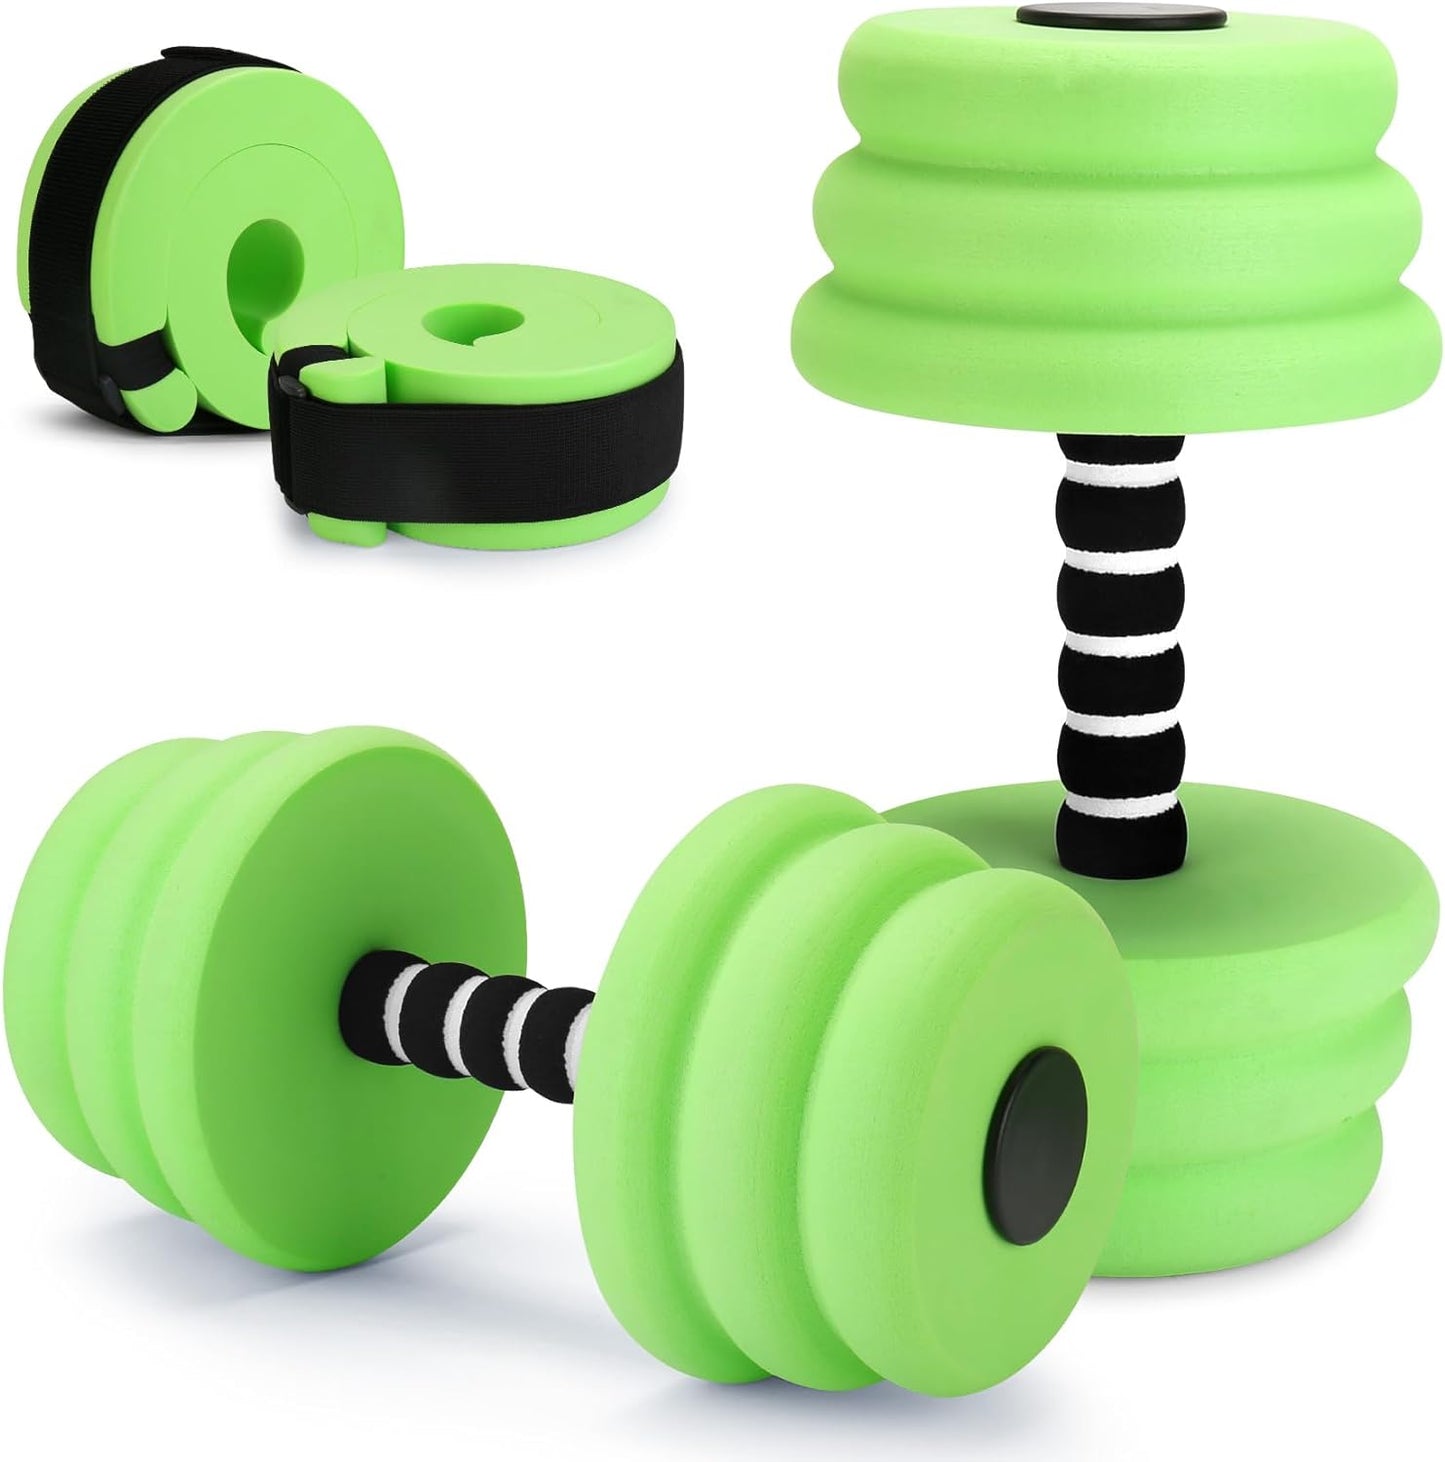 Water Aerobics Set for Aquatic Exercise, Pool Fitness Equipment Foam Water Dumbbell Set, New Upgrade Aquatic Dumbbells and Foam Swim Aquatic Cuffs, Water Workout Fitness Tool